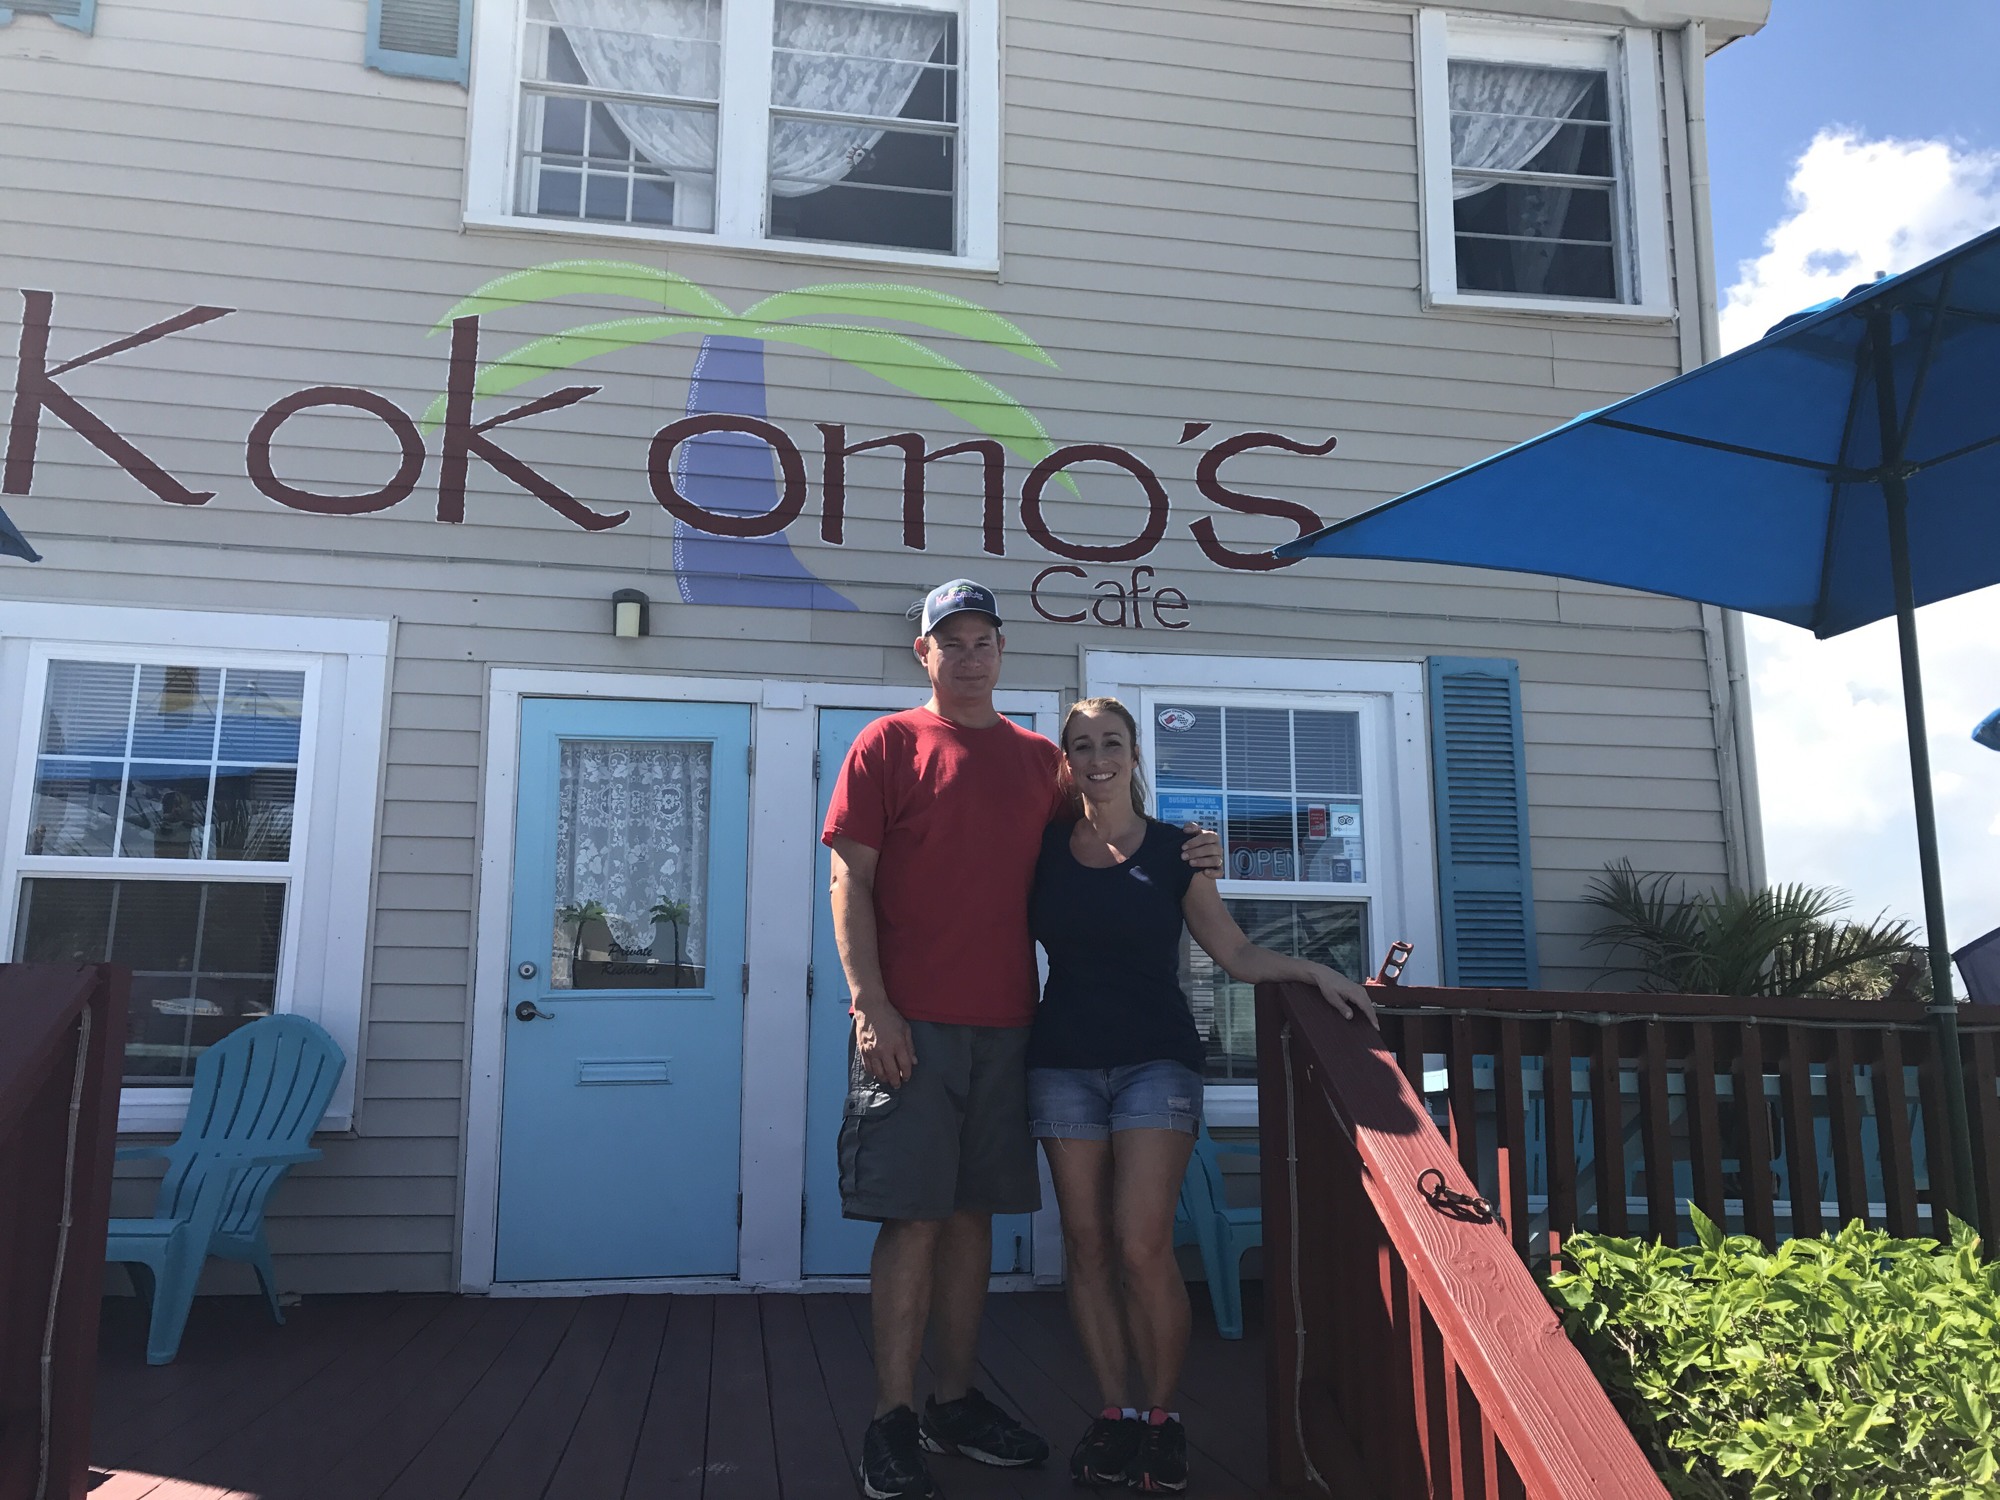 Greg Taylor (left) and his wife, Christy, in front of their restaurant, Kokomo's Cafe. Photo courtesy of Christy Taylor